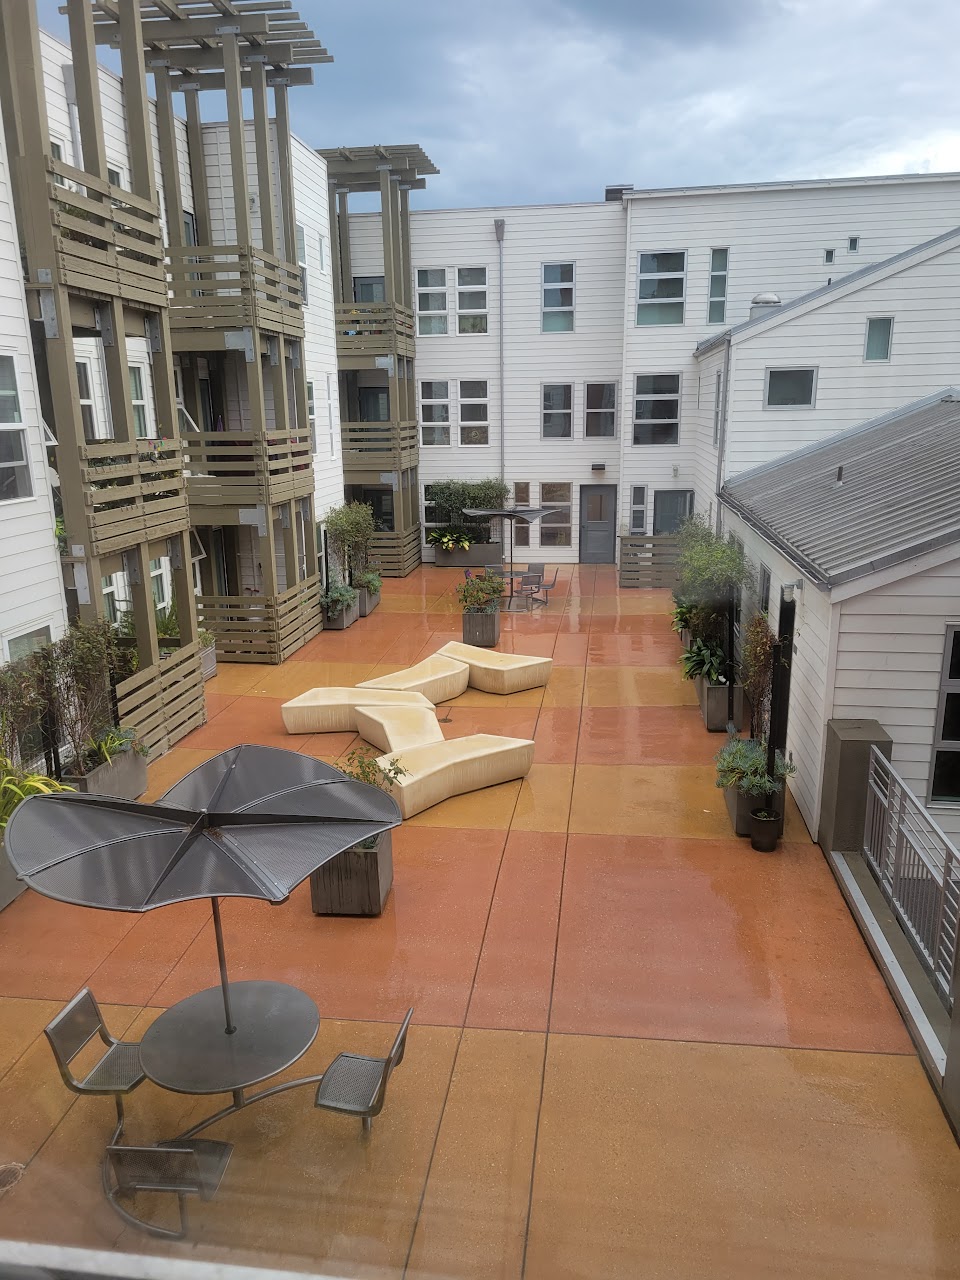 Photo of COLUMBIA PARK. Affordable housing located at 21 COLUMBIA SQ SAN FRANCISCO, CA 94103